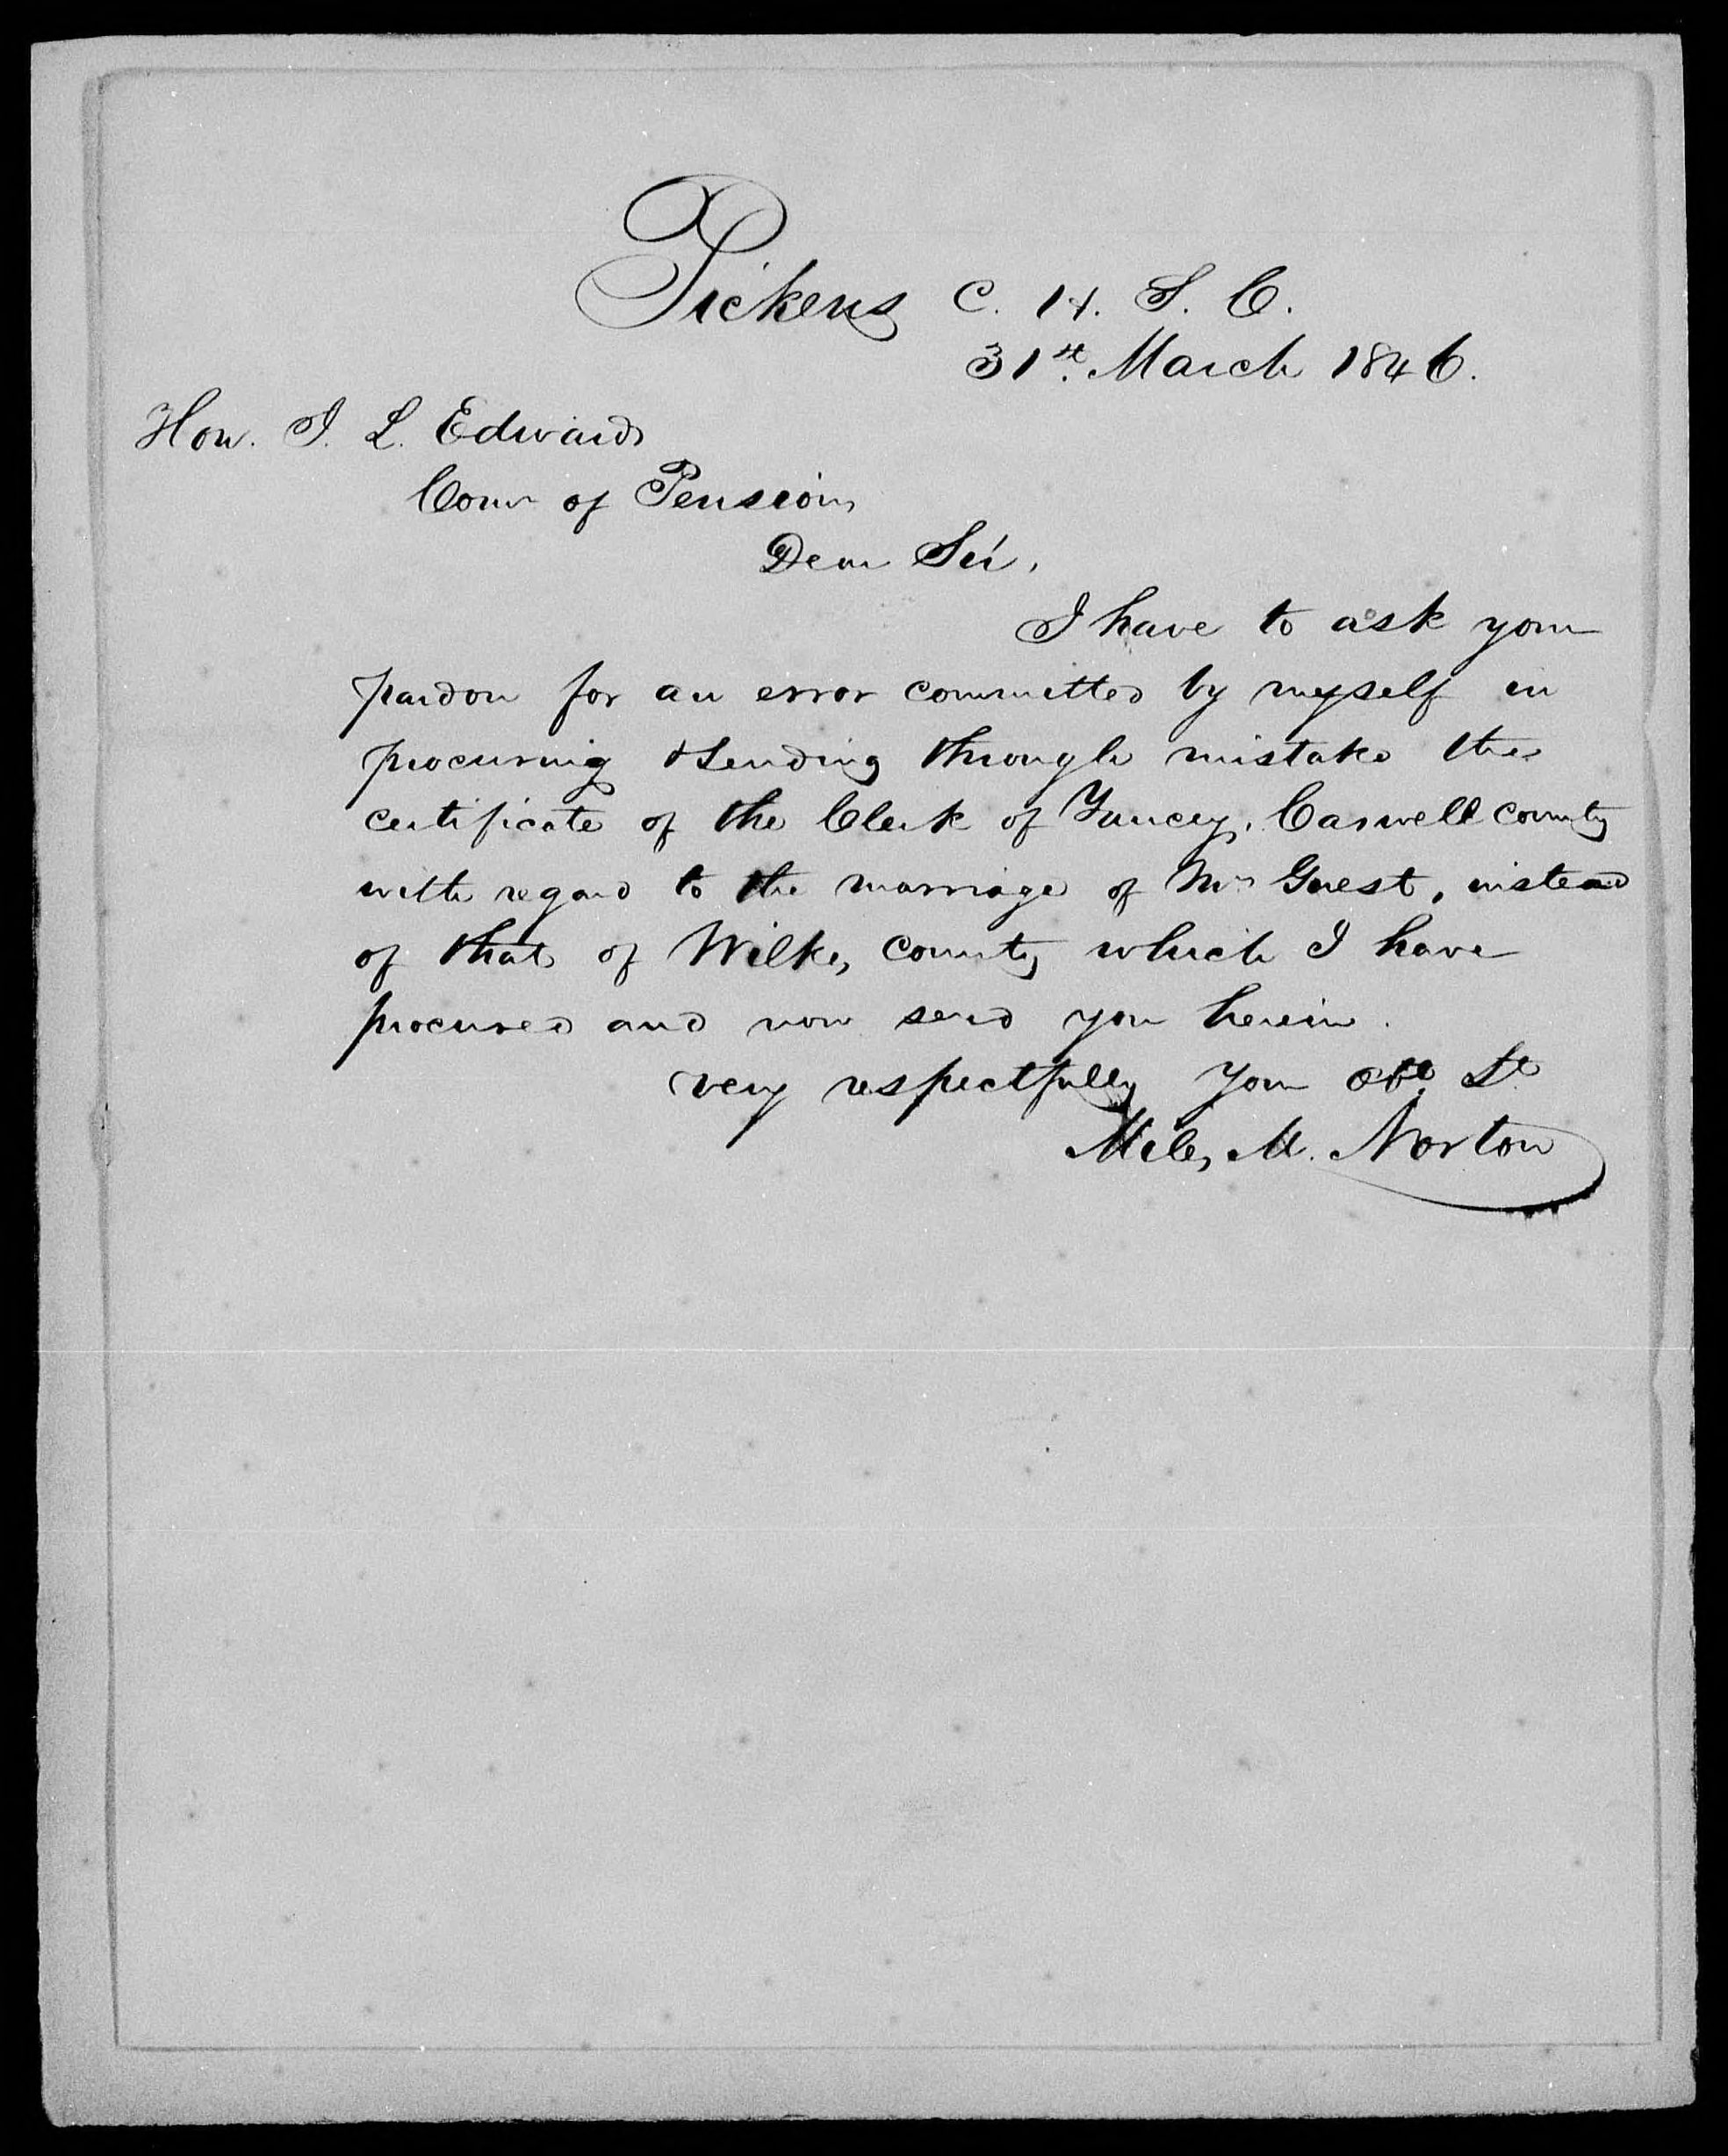 Letter from Miles M. Norton to James L. Edwards, 31 March 1846, page 1